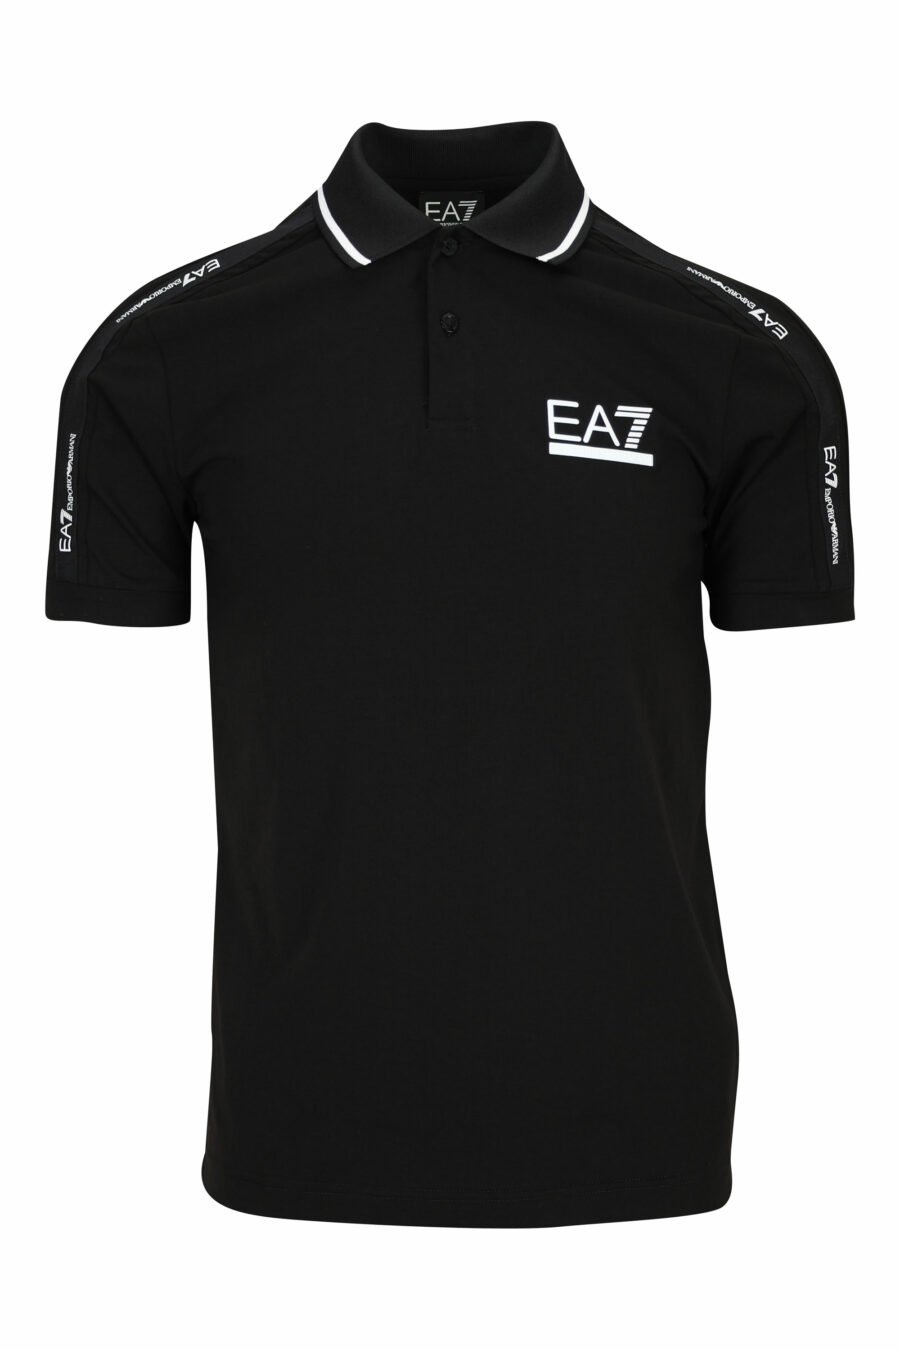 Black polo shirt with mini logo "lux identity" on shoulder band - 8058947458943